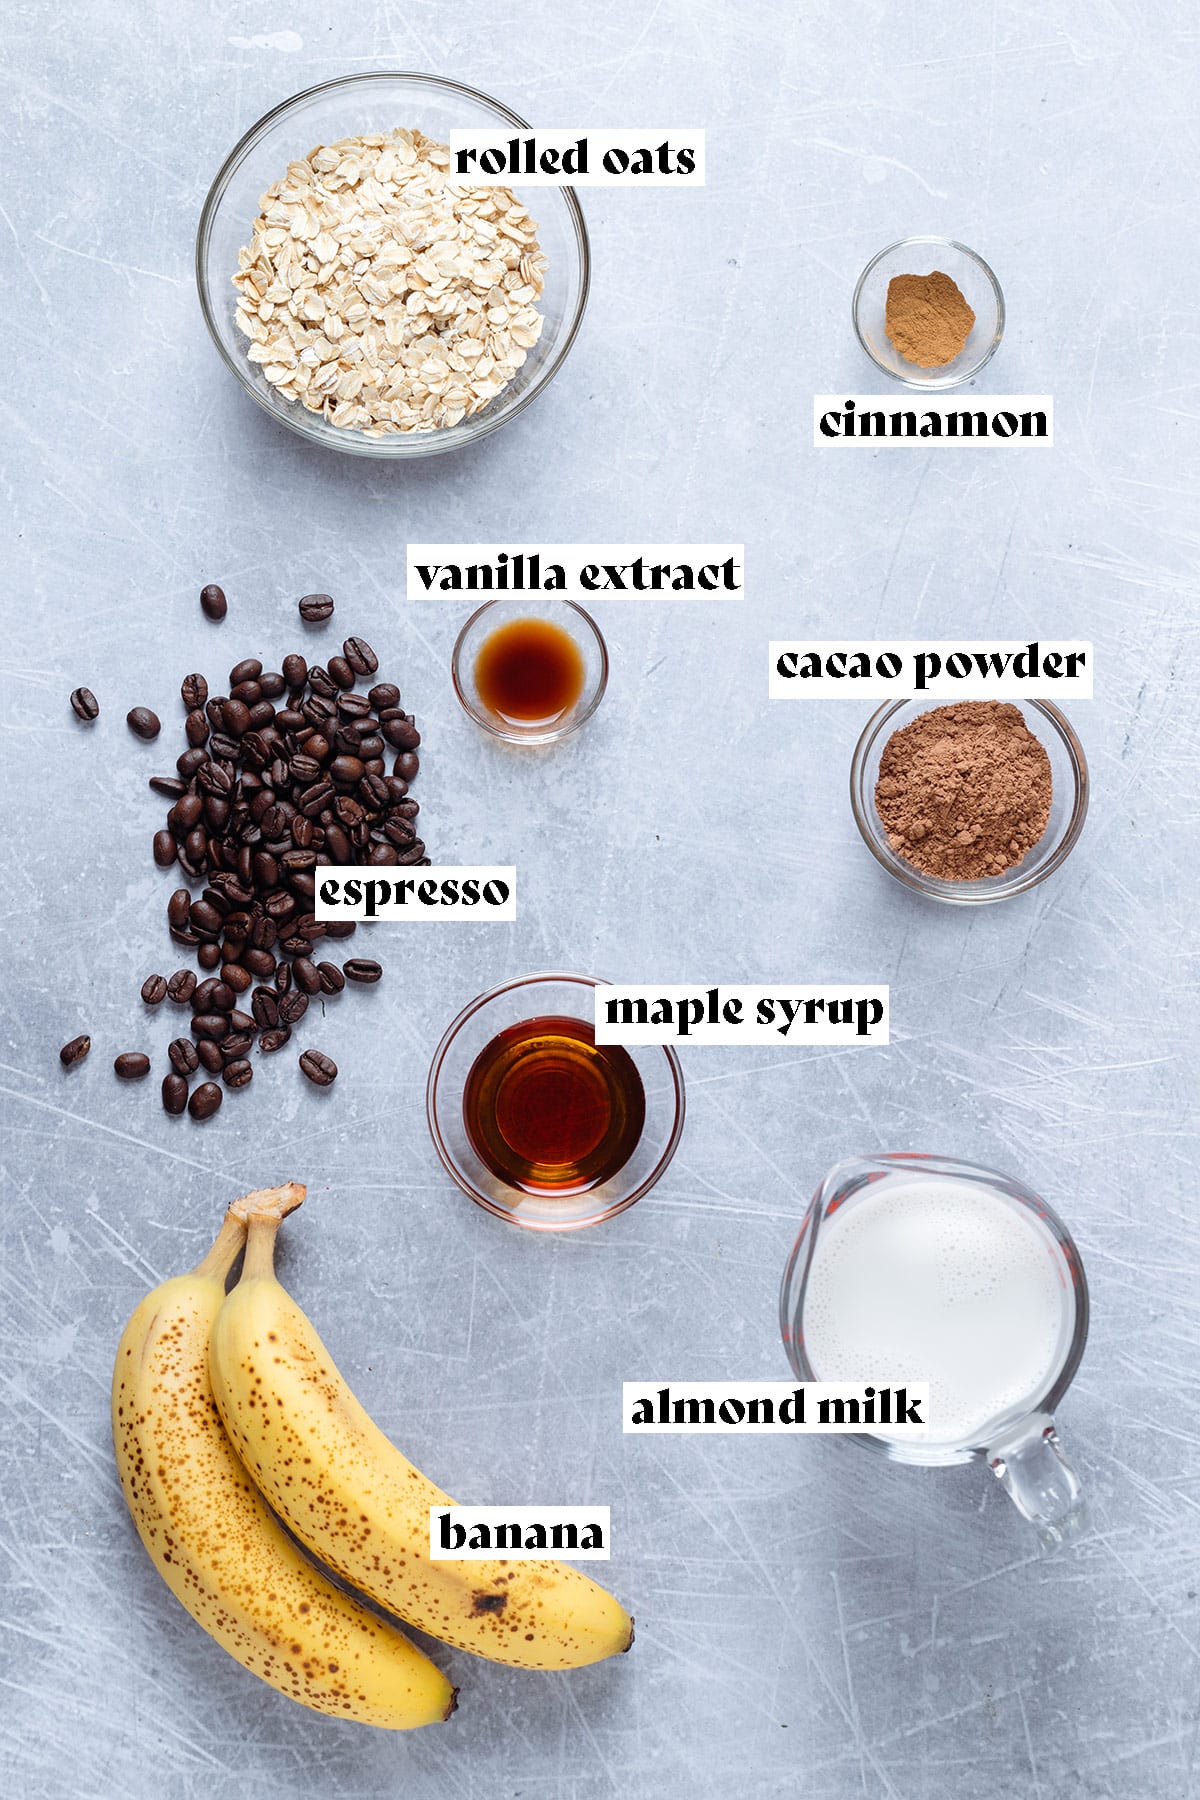 Ingredients for oatmeal like oats, bananas, maple syrup, cacao, milk, and other ingredients laid out on a grey background.